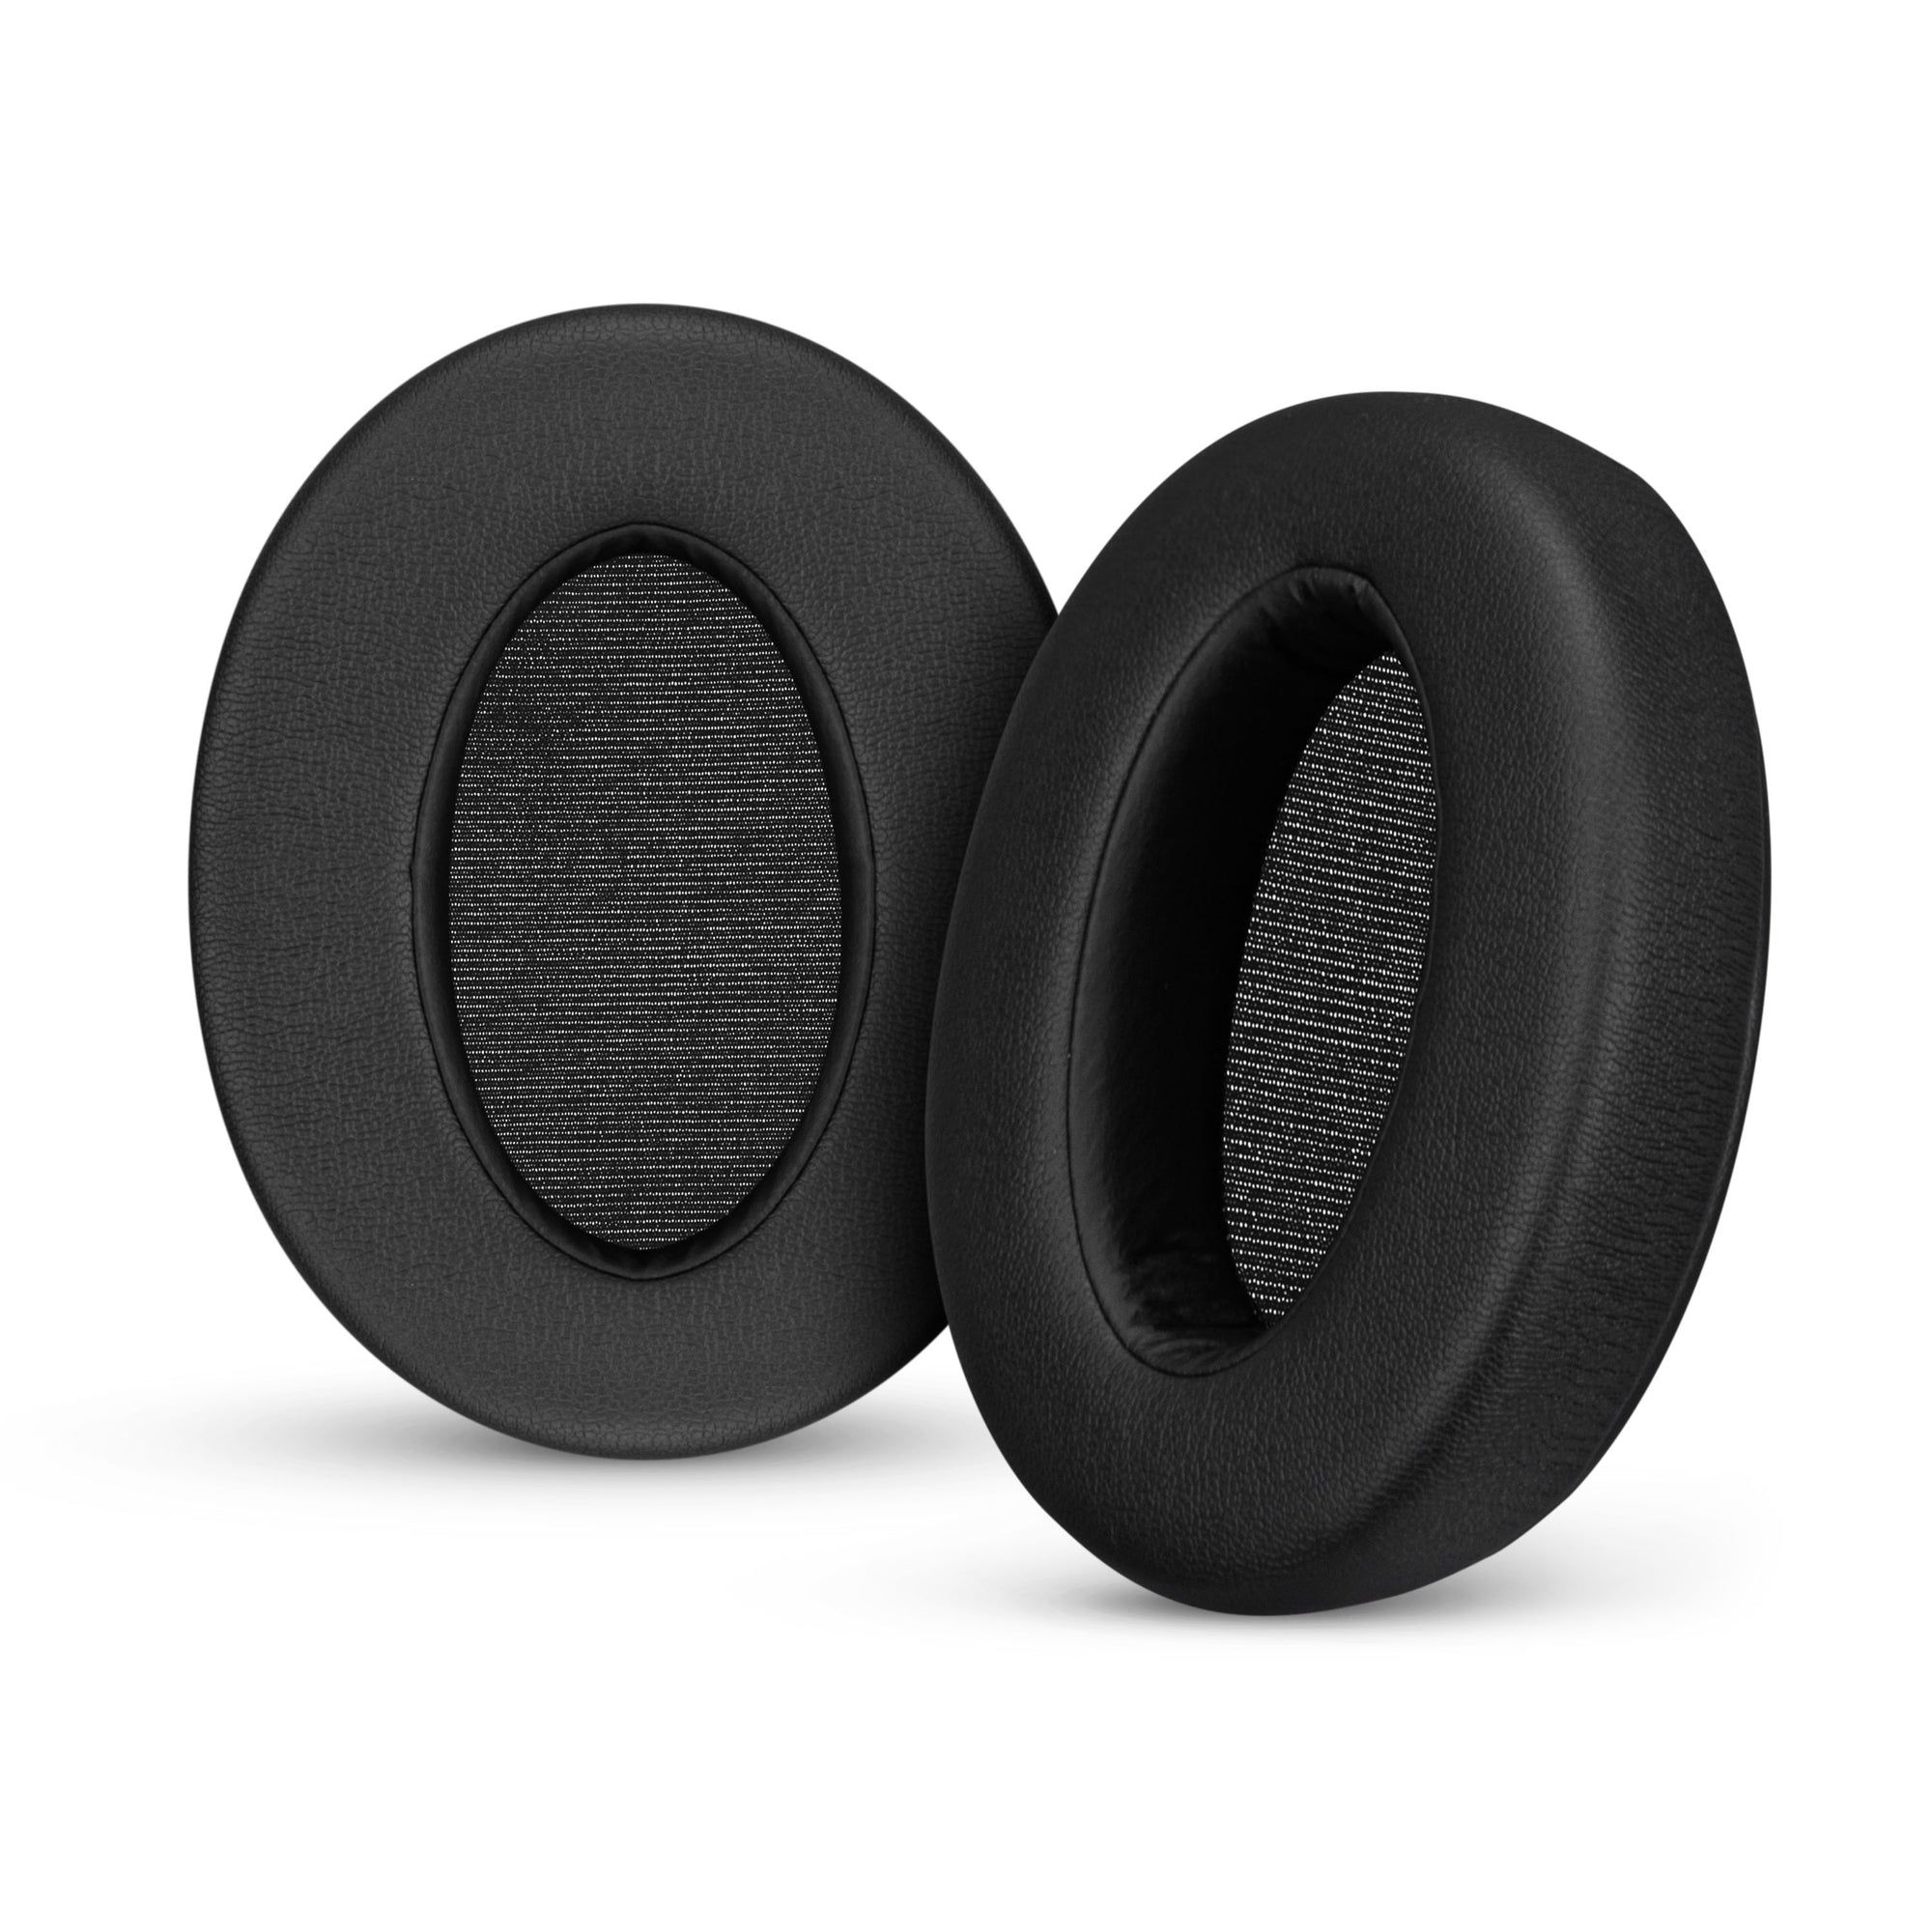 Replacement Earpads for Sony WH-XB910N Wireless Headphones With Soft PU Leather & Memory Foam